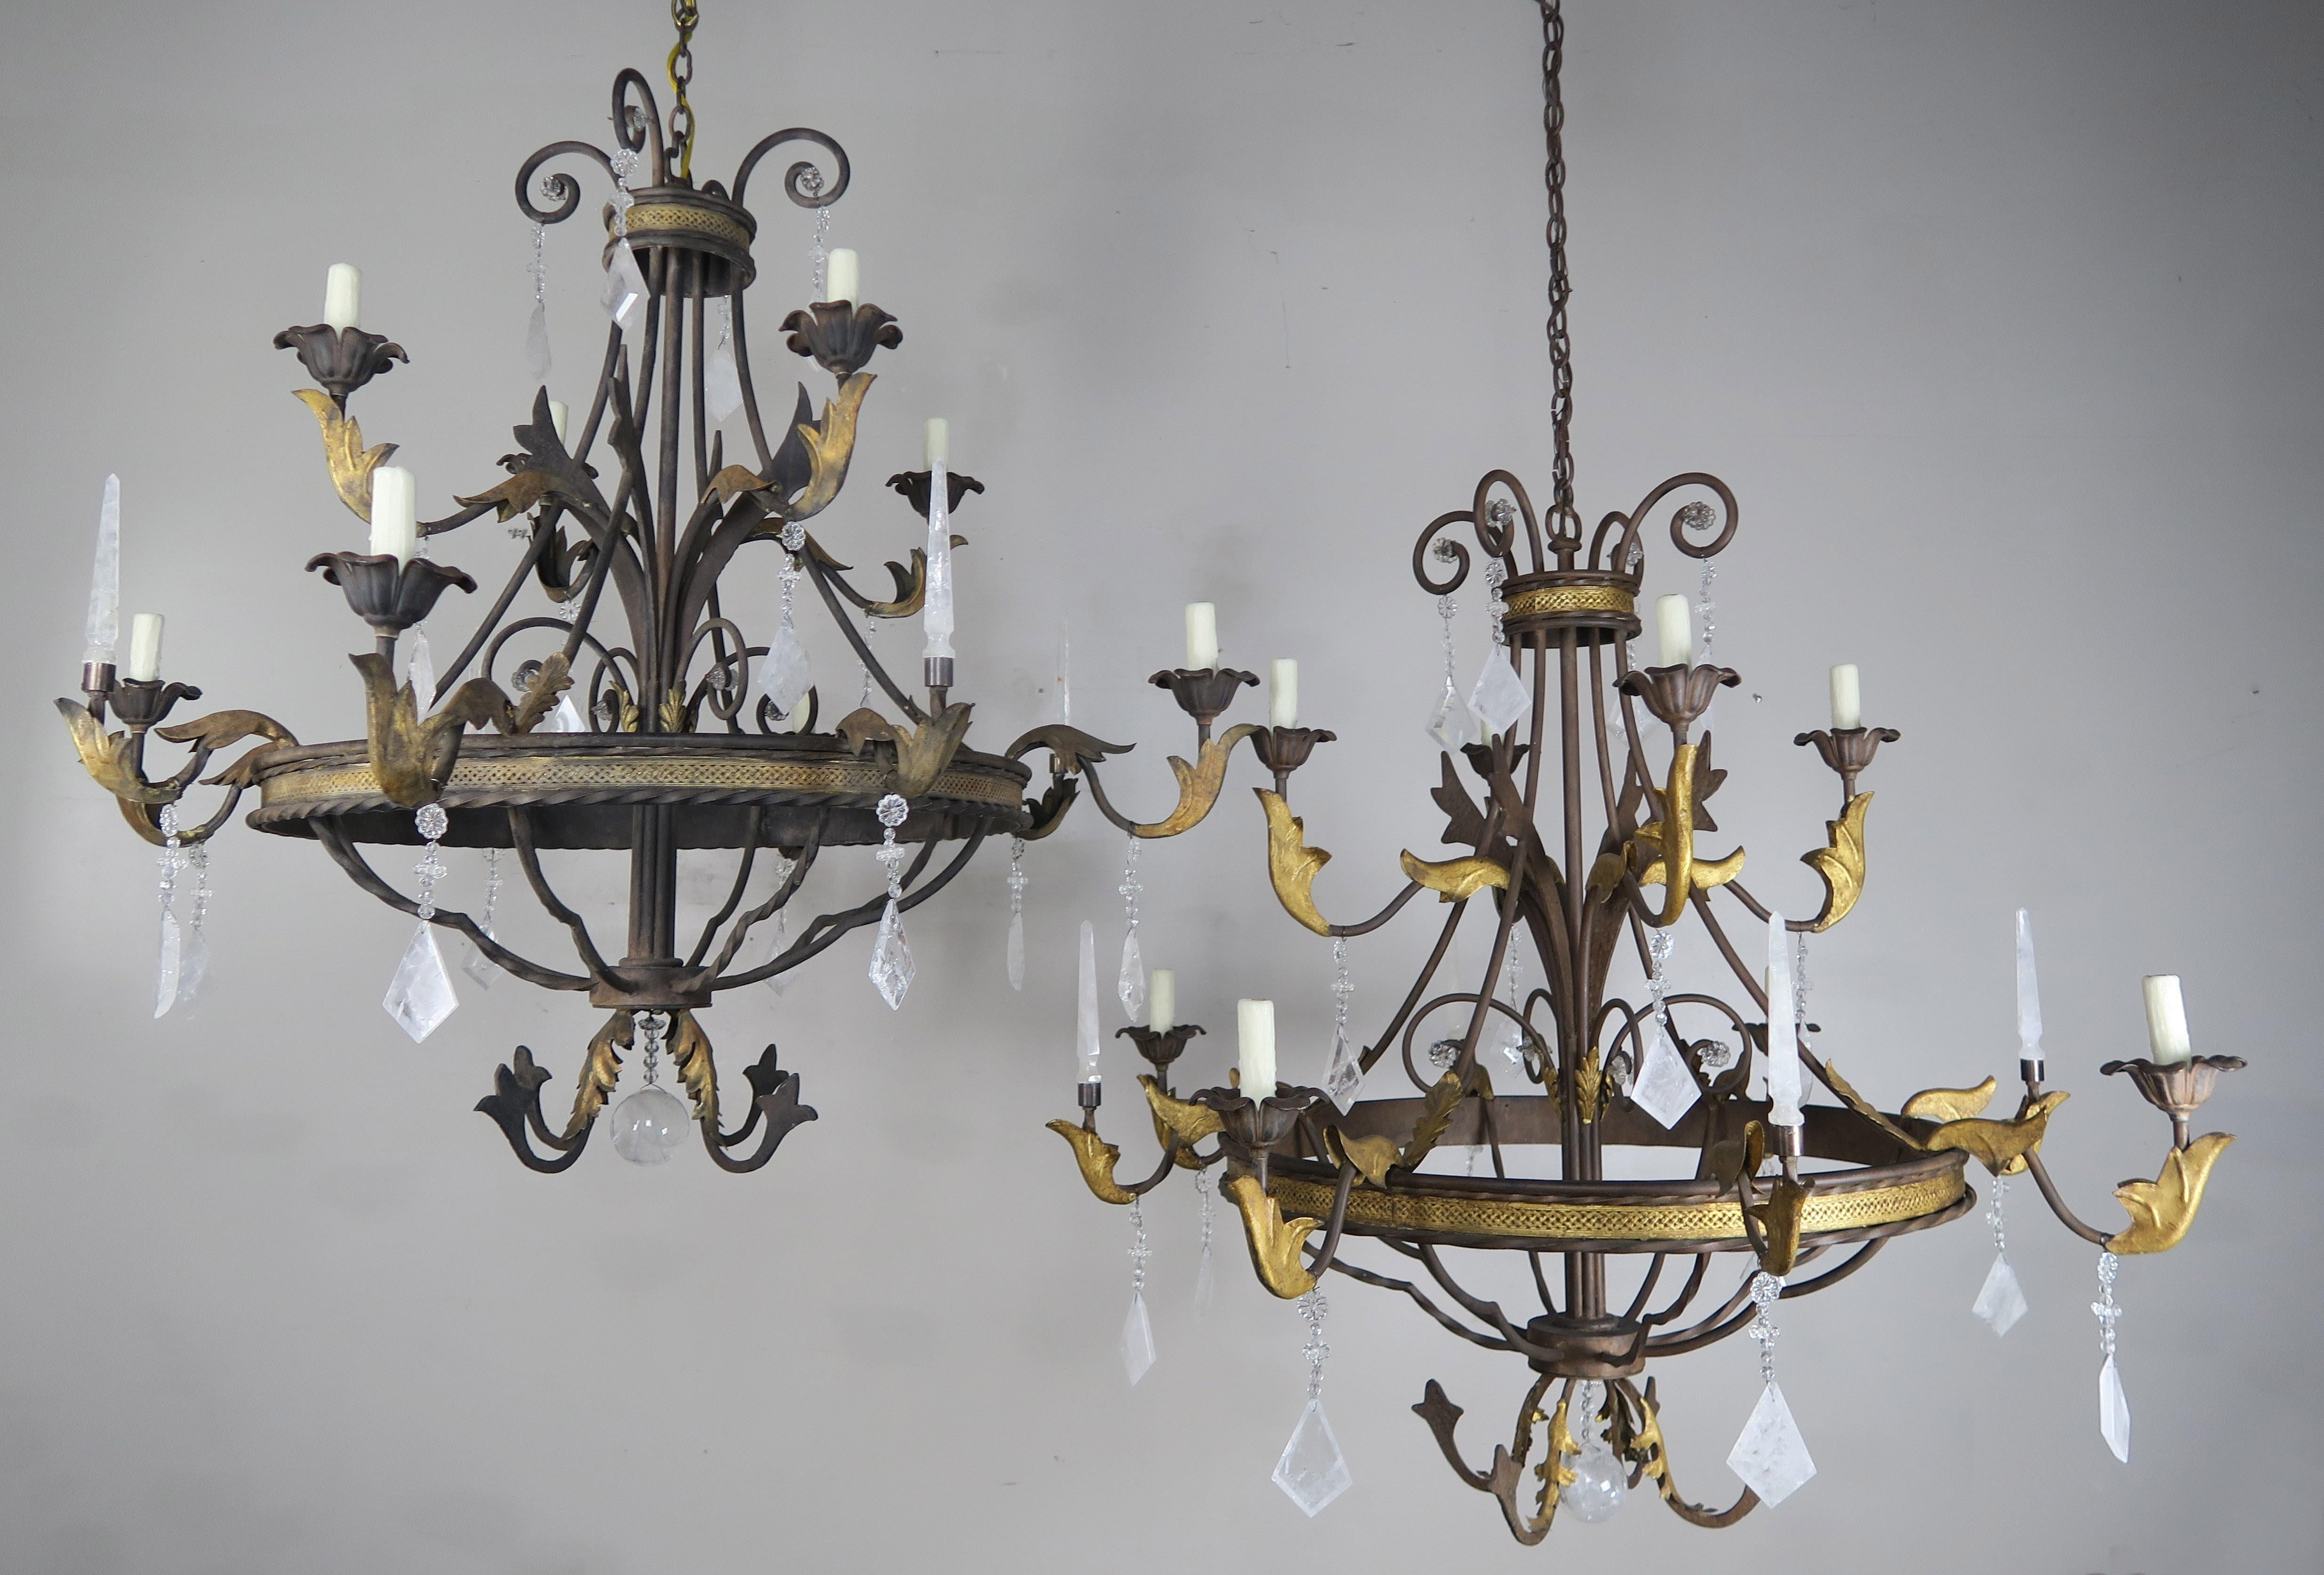 Pair of 8-light two-tier Spanish Baroque style rock crystal chandeliers with gold leaf highlights. Rock diamond shaped crystals and rock crystal spheres can be seen placed throughout the pair of chandeliers. The chandeliers are newly rewired with